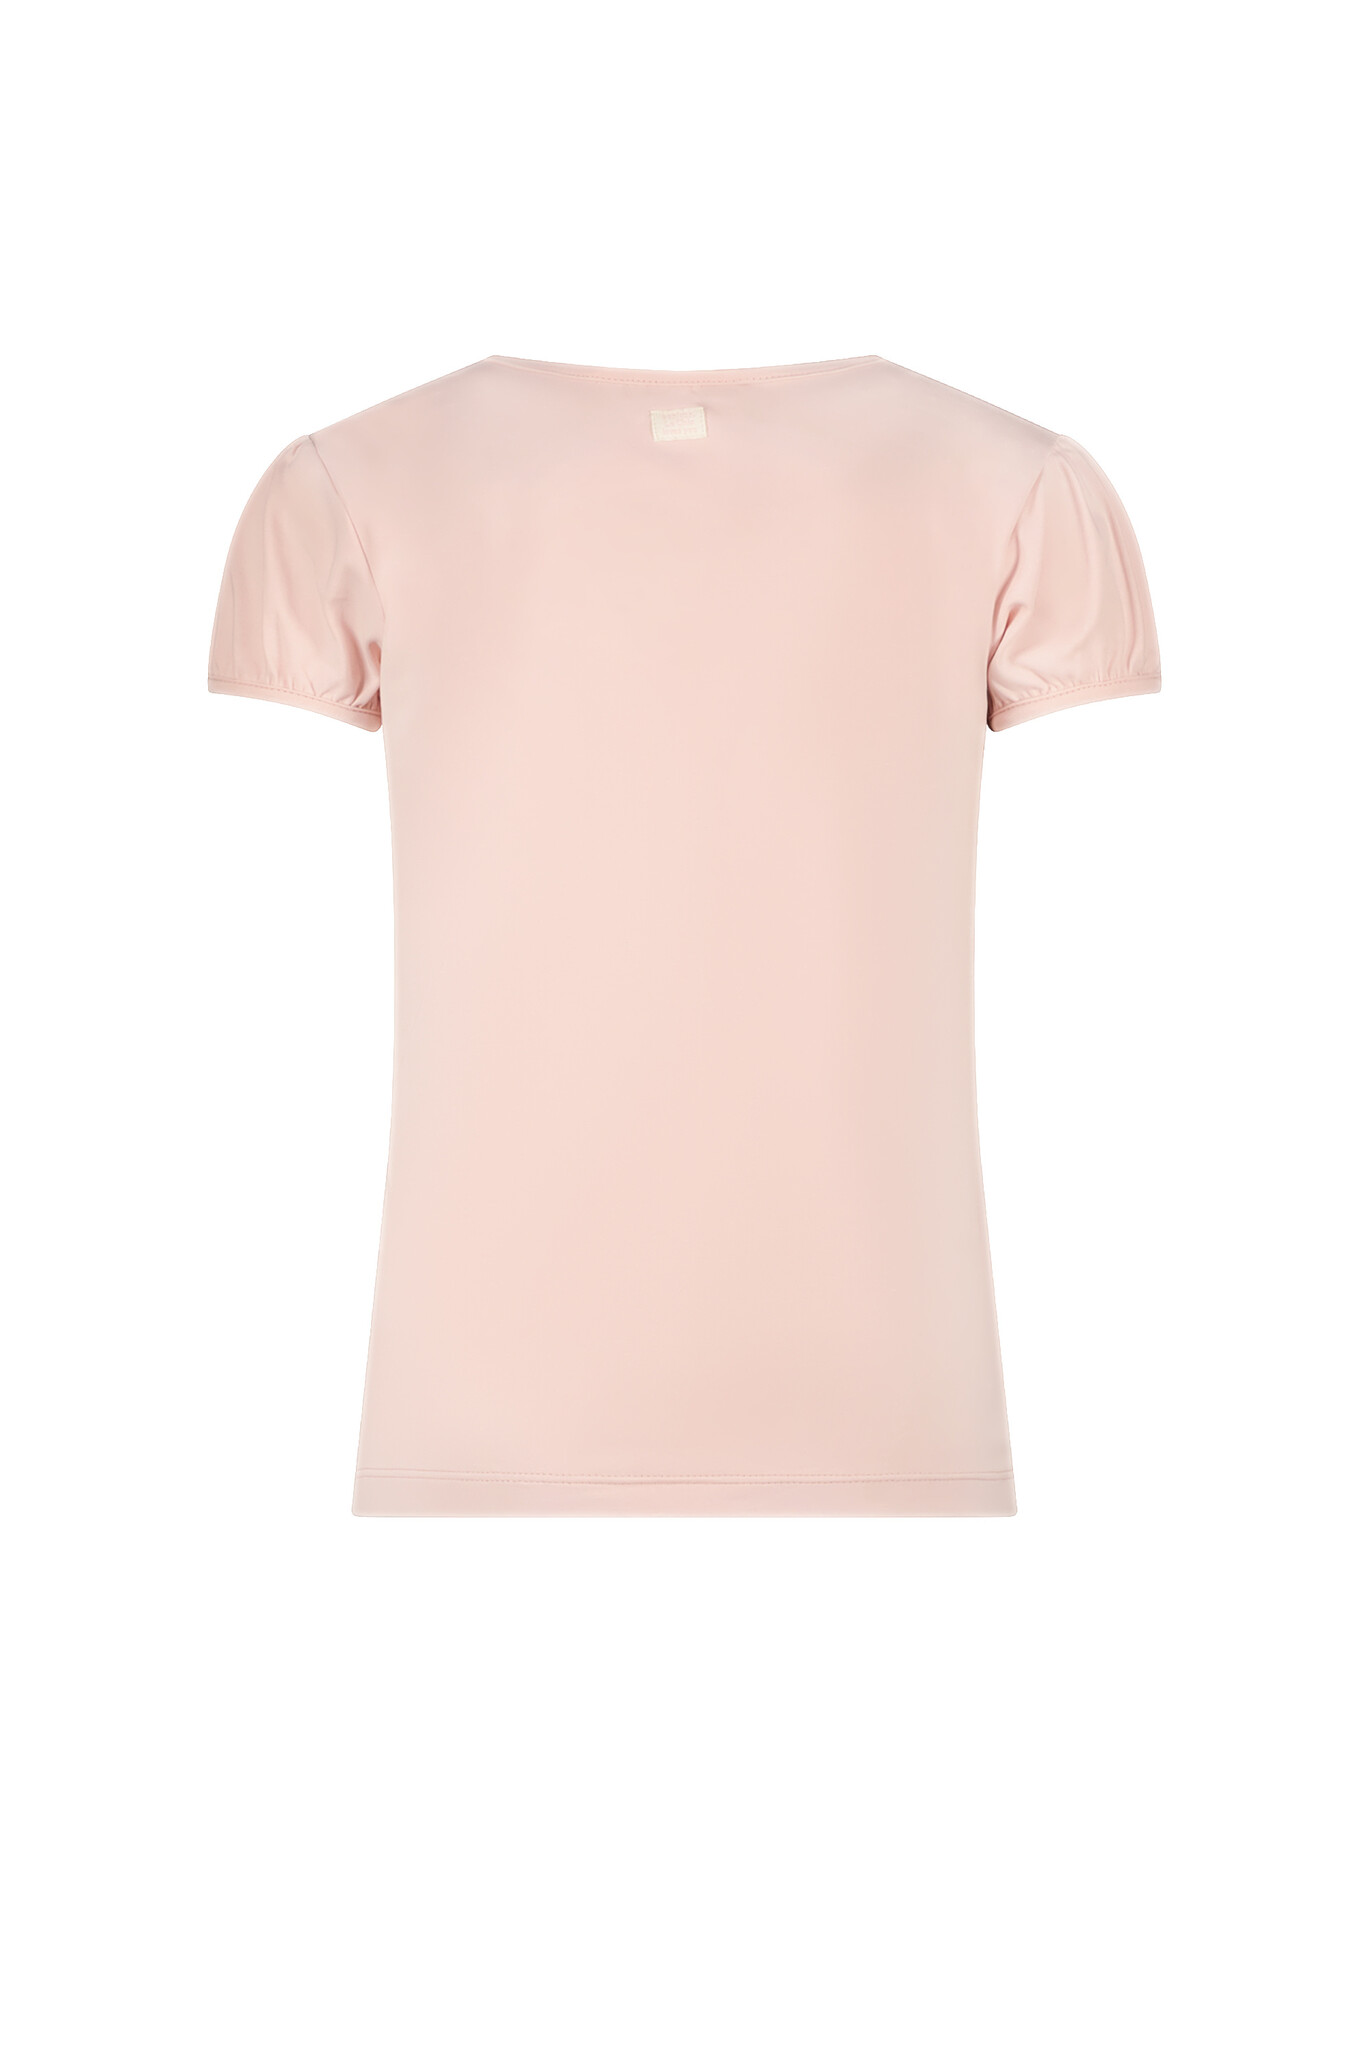 Nommy Luxe Flowers Tee - Baroque Pink